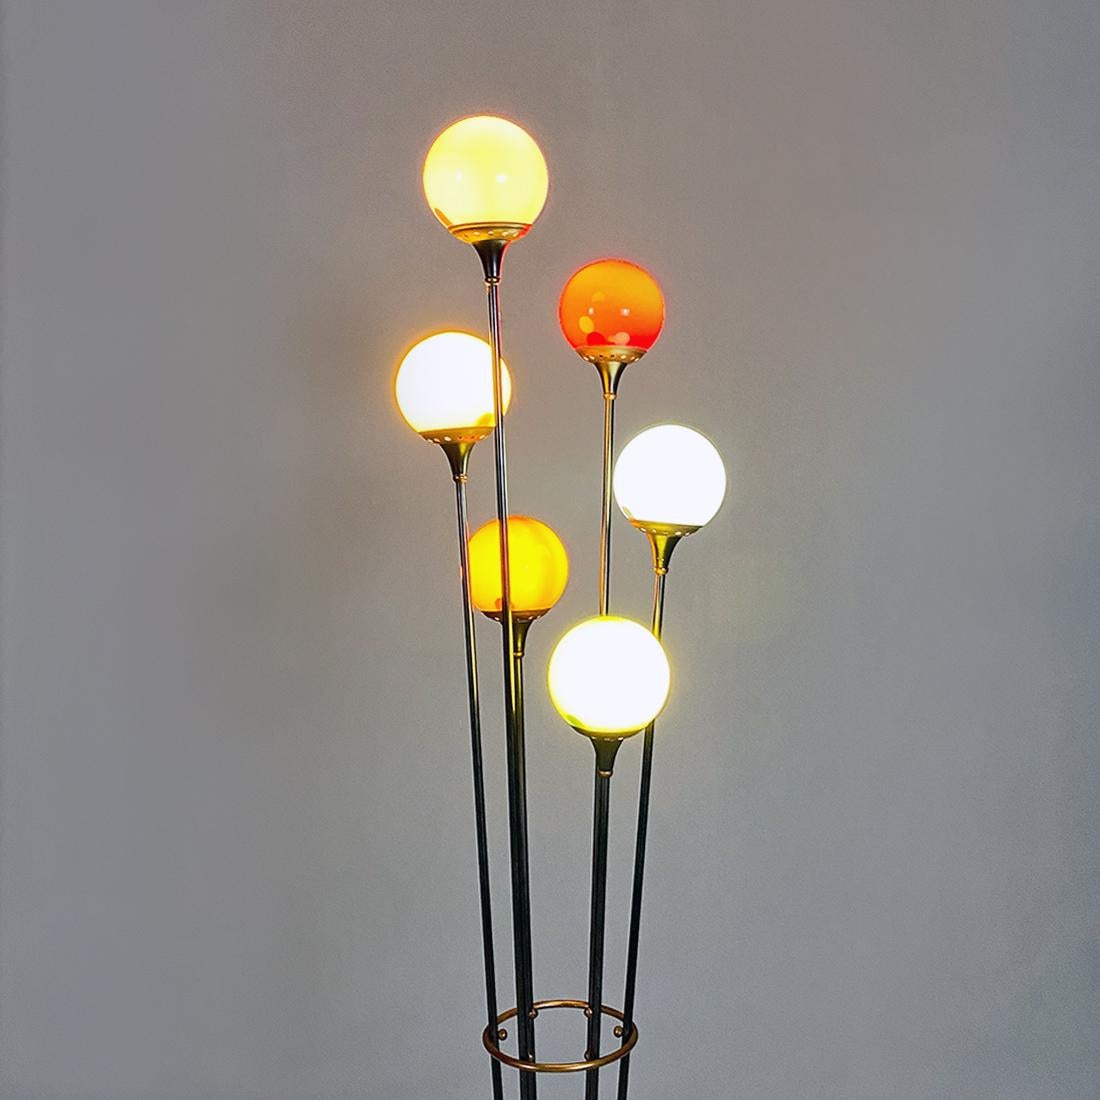 Italian Mid Century Marble Metal and Glass Alberello Lamp by Stilnovo, 1950s For Sale 10